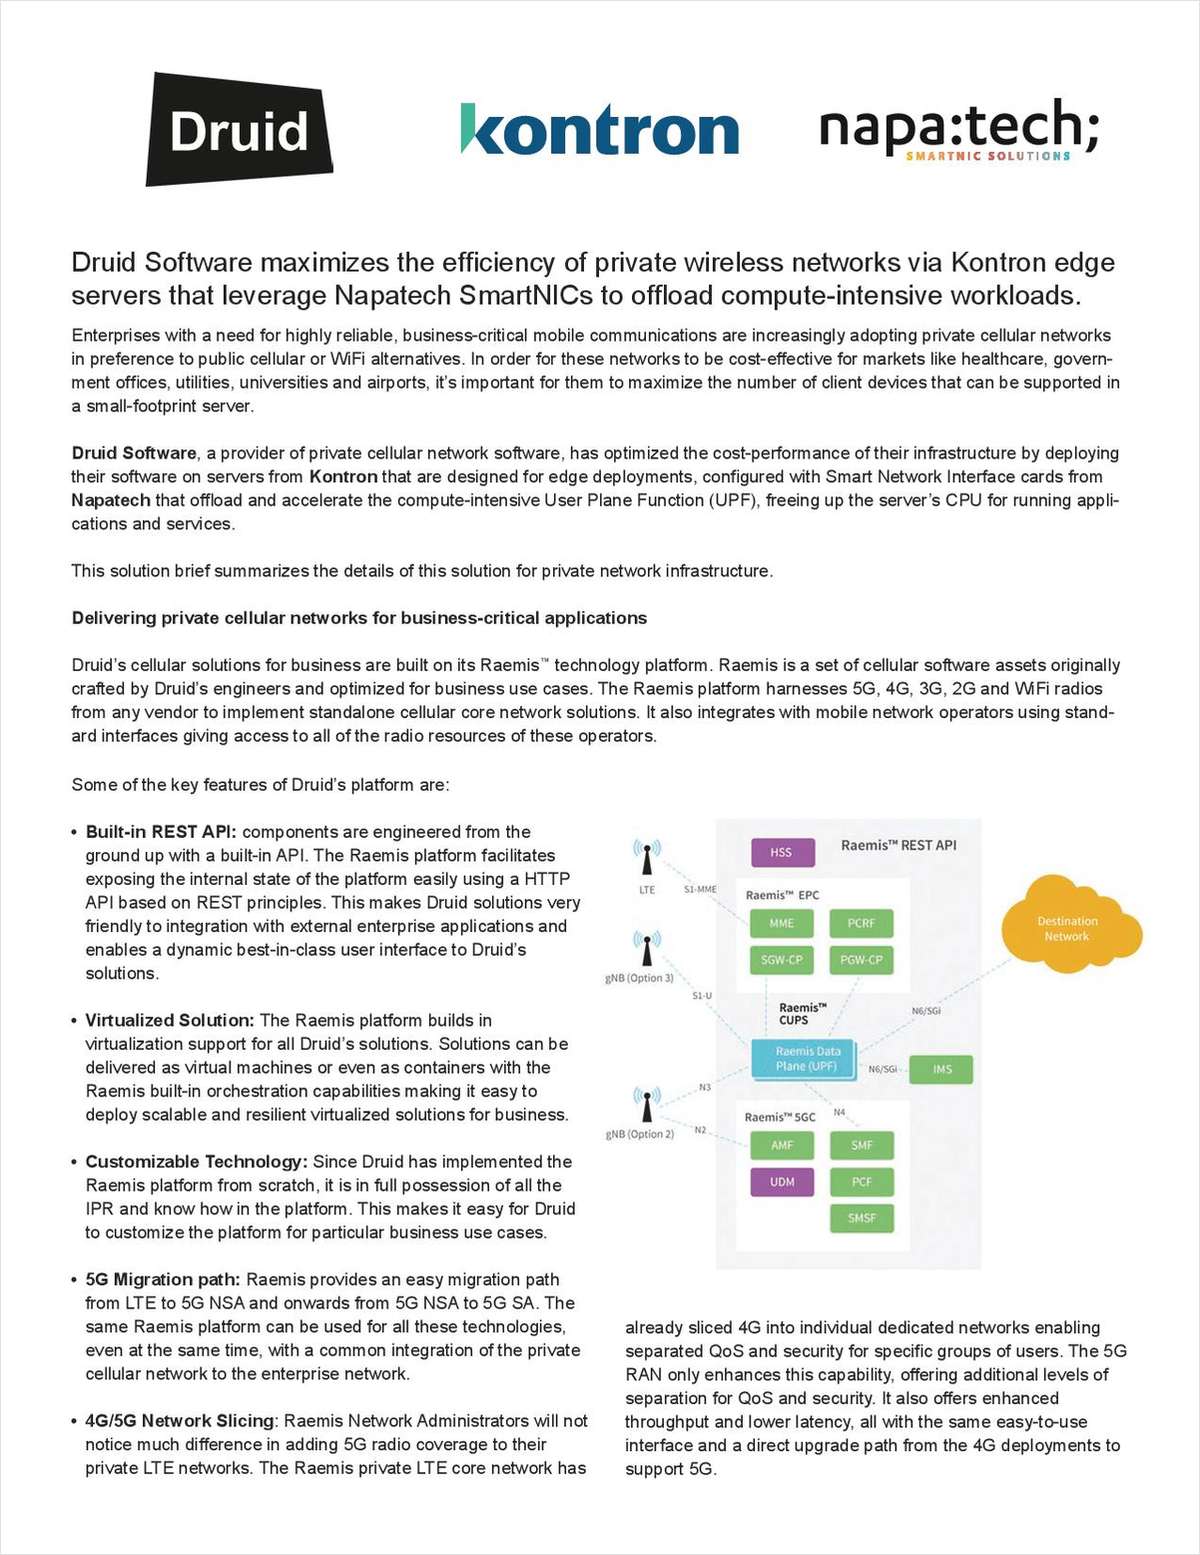 Druid Software maximizes the efficiency of private wireless networks via Kontron edge servers that leverage Napatech SmartNICs to offload compute-intensive workloads